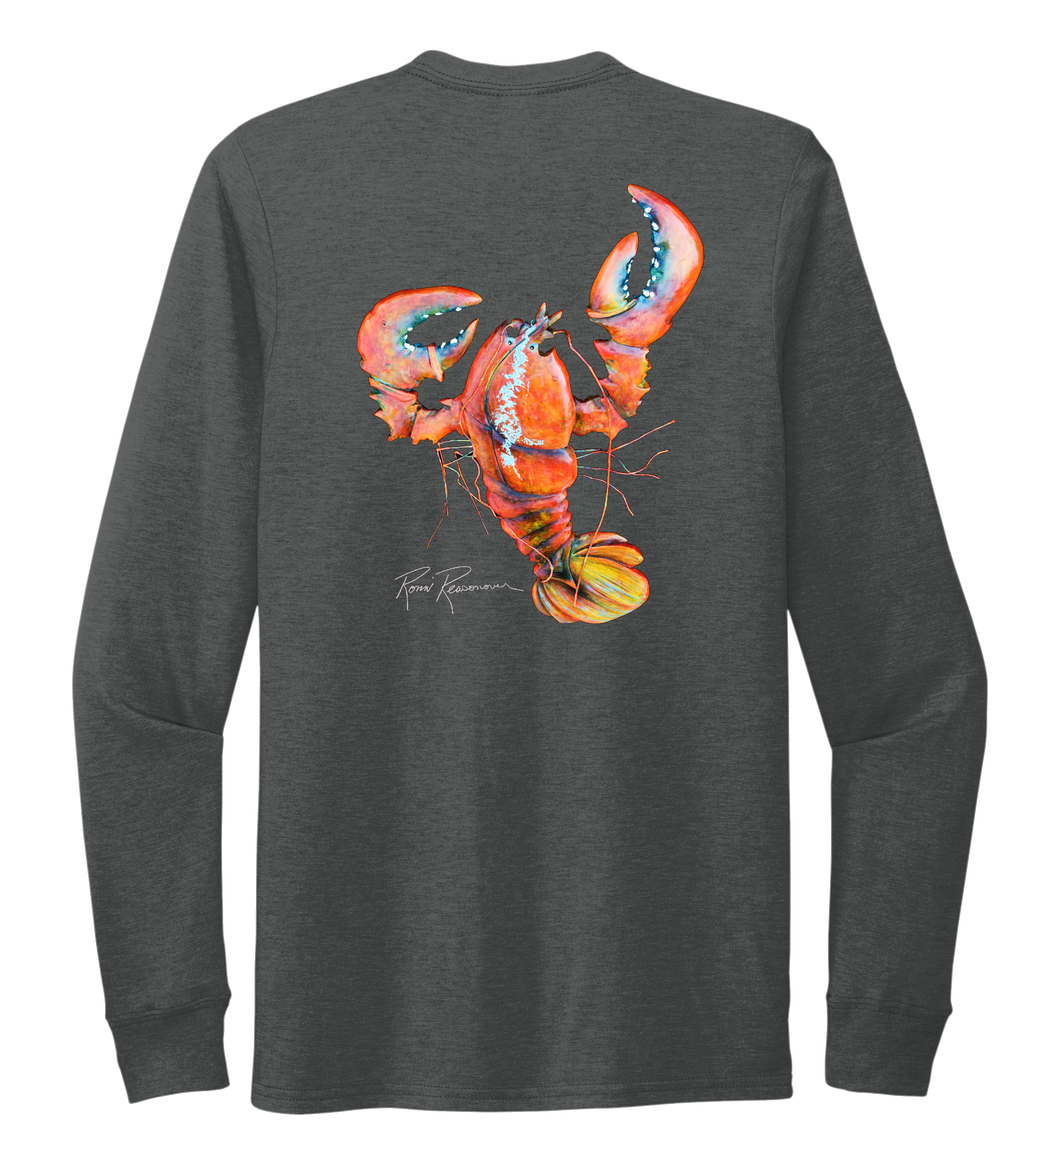 Ronnie Reasonover, The Lobster, Crew Neck Long Sleeve T-Shirt in Slate Black